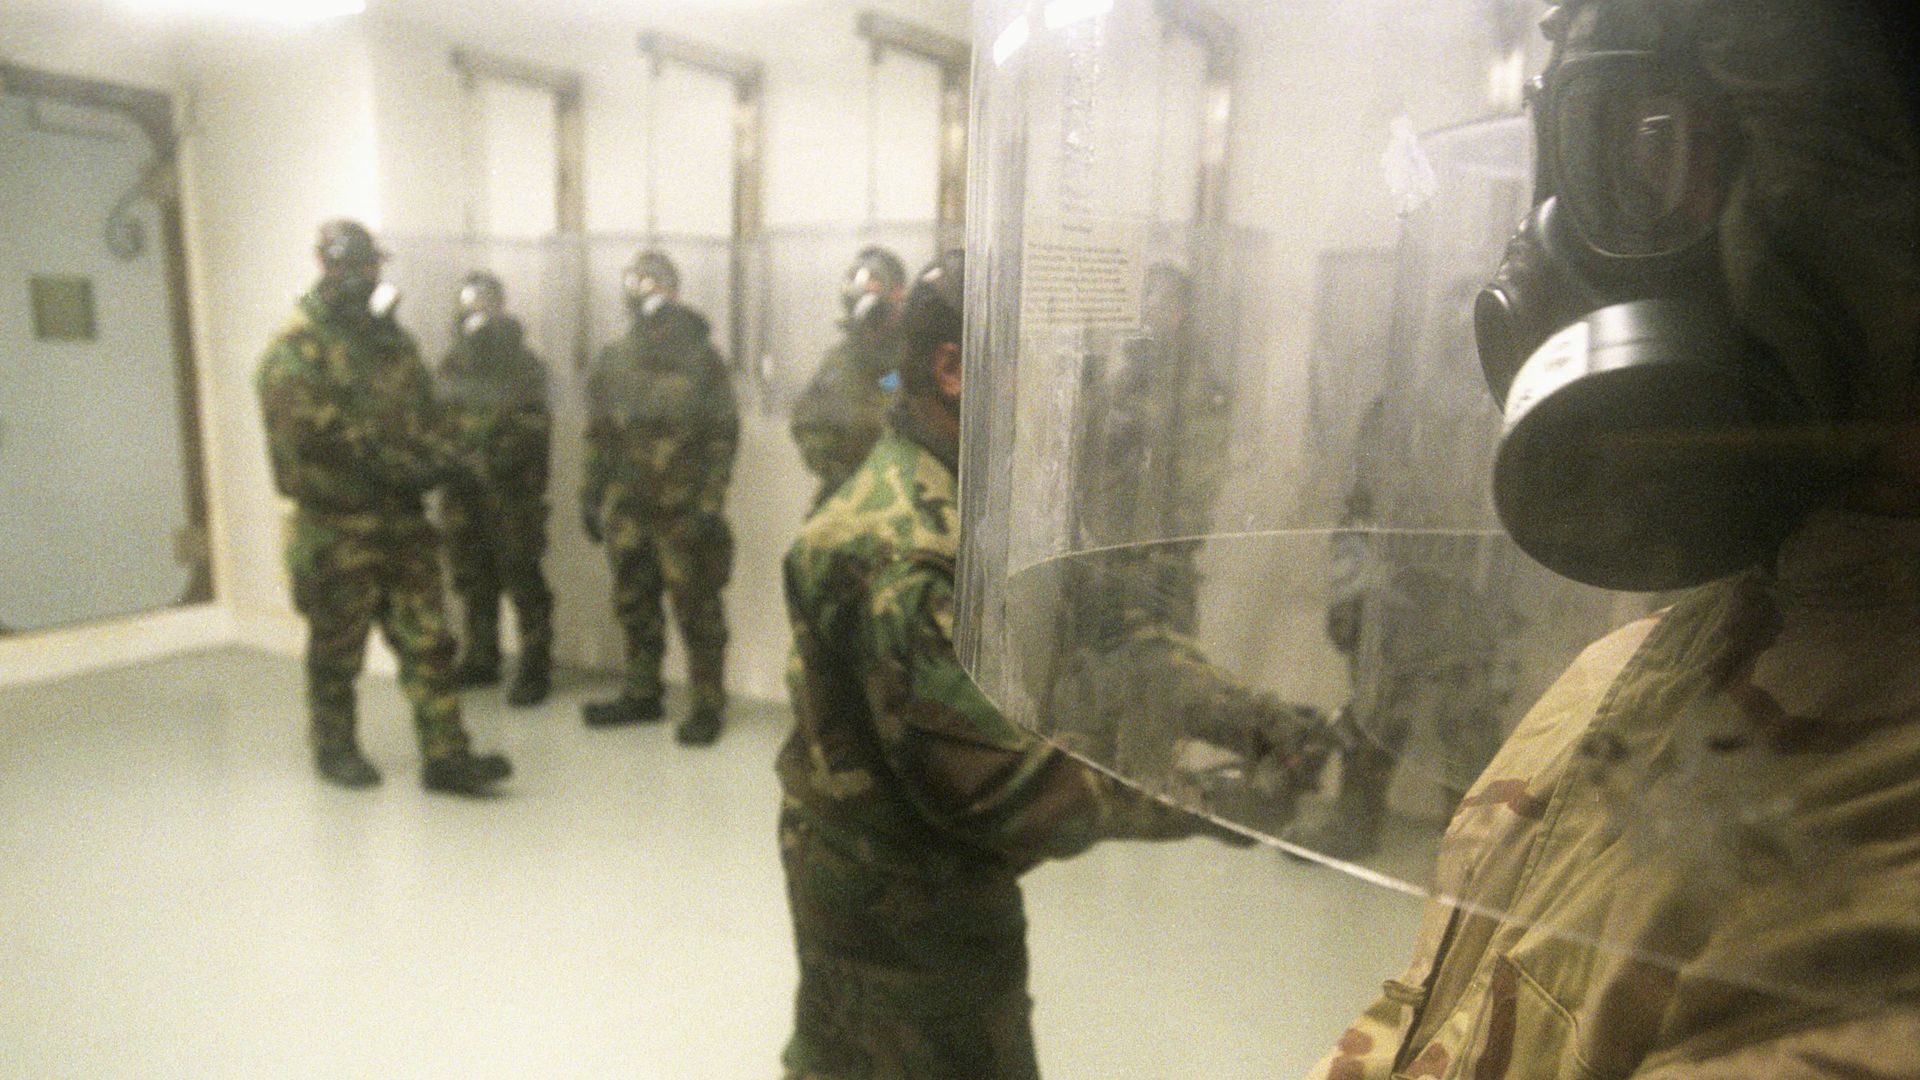 Live sarin and VX nerve agent training 